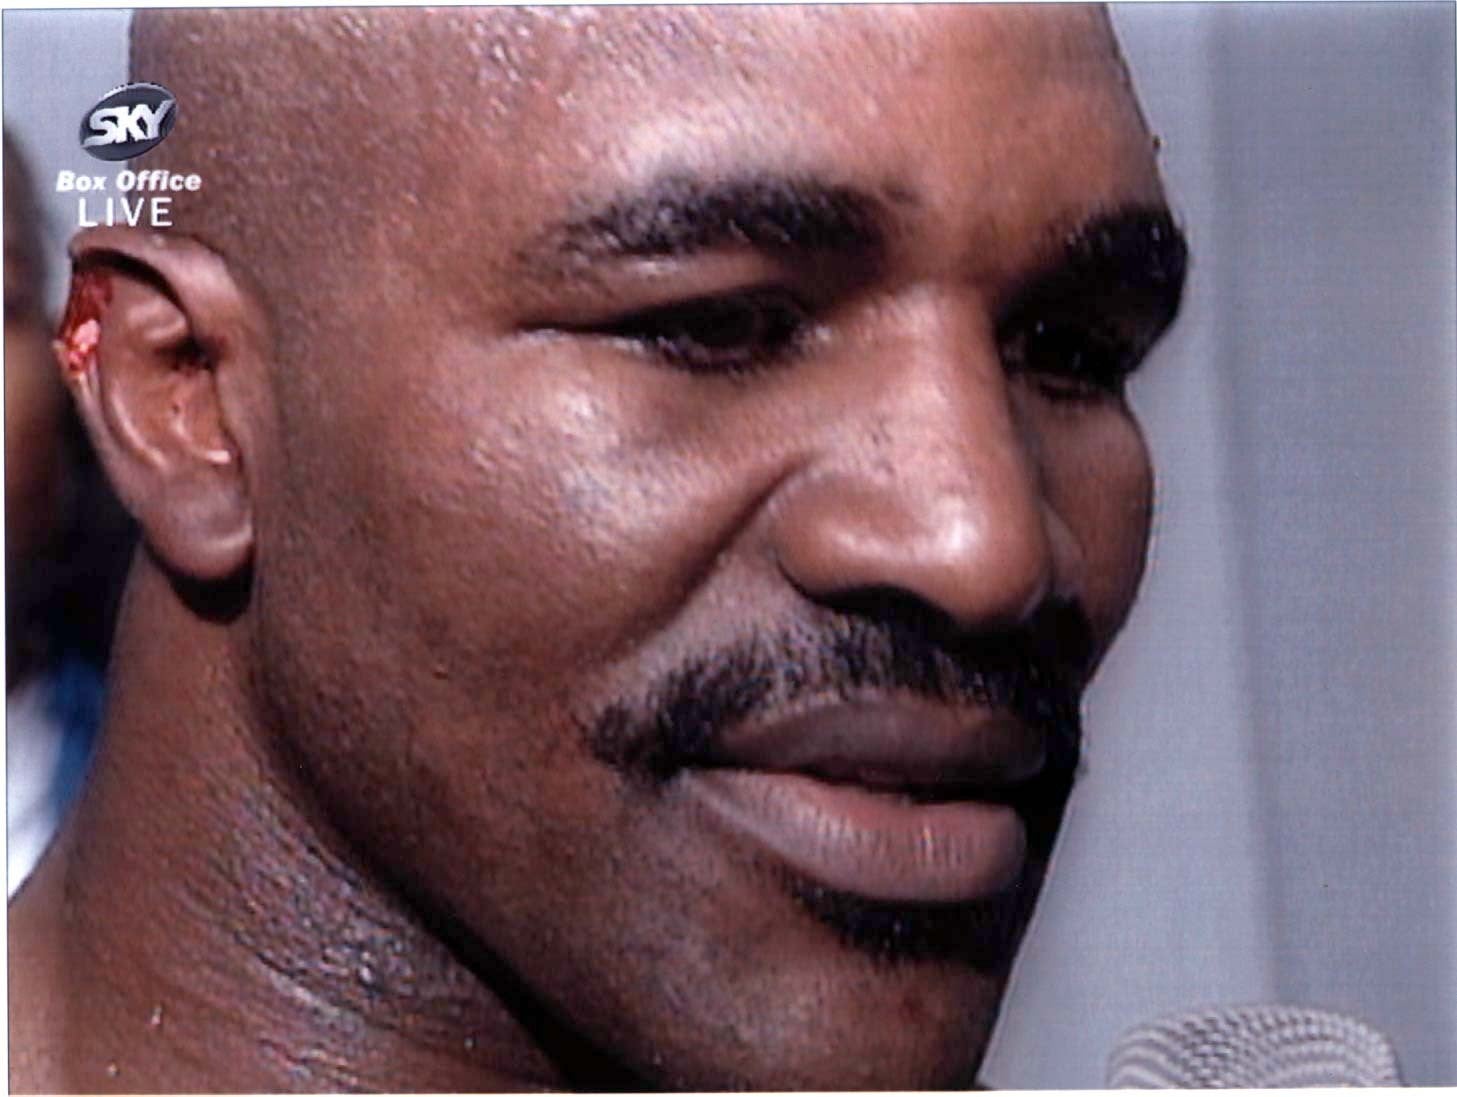 Evander Holyfield forgave Mike Tyson for his shocking assault (Sky Sports/PA handout)